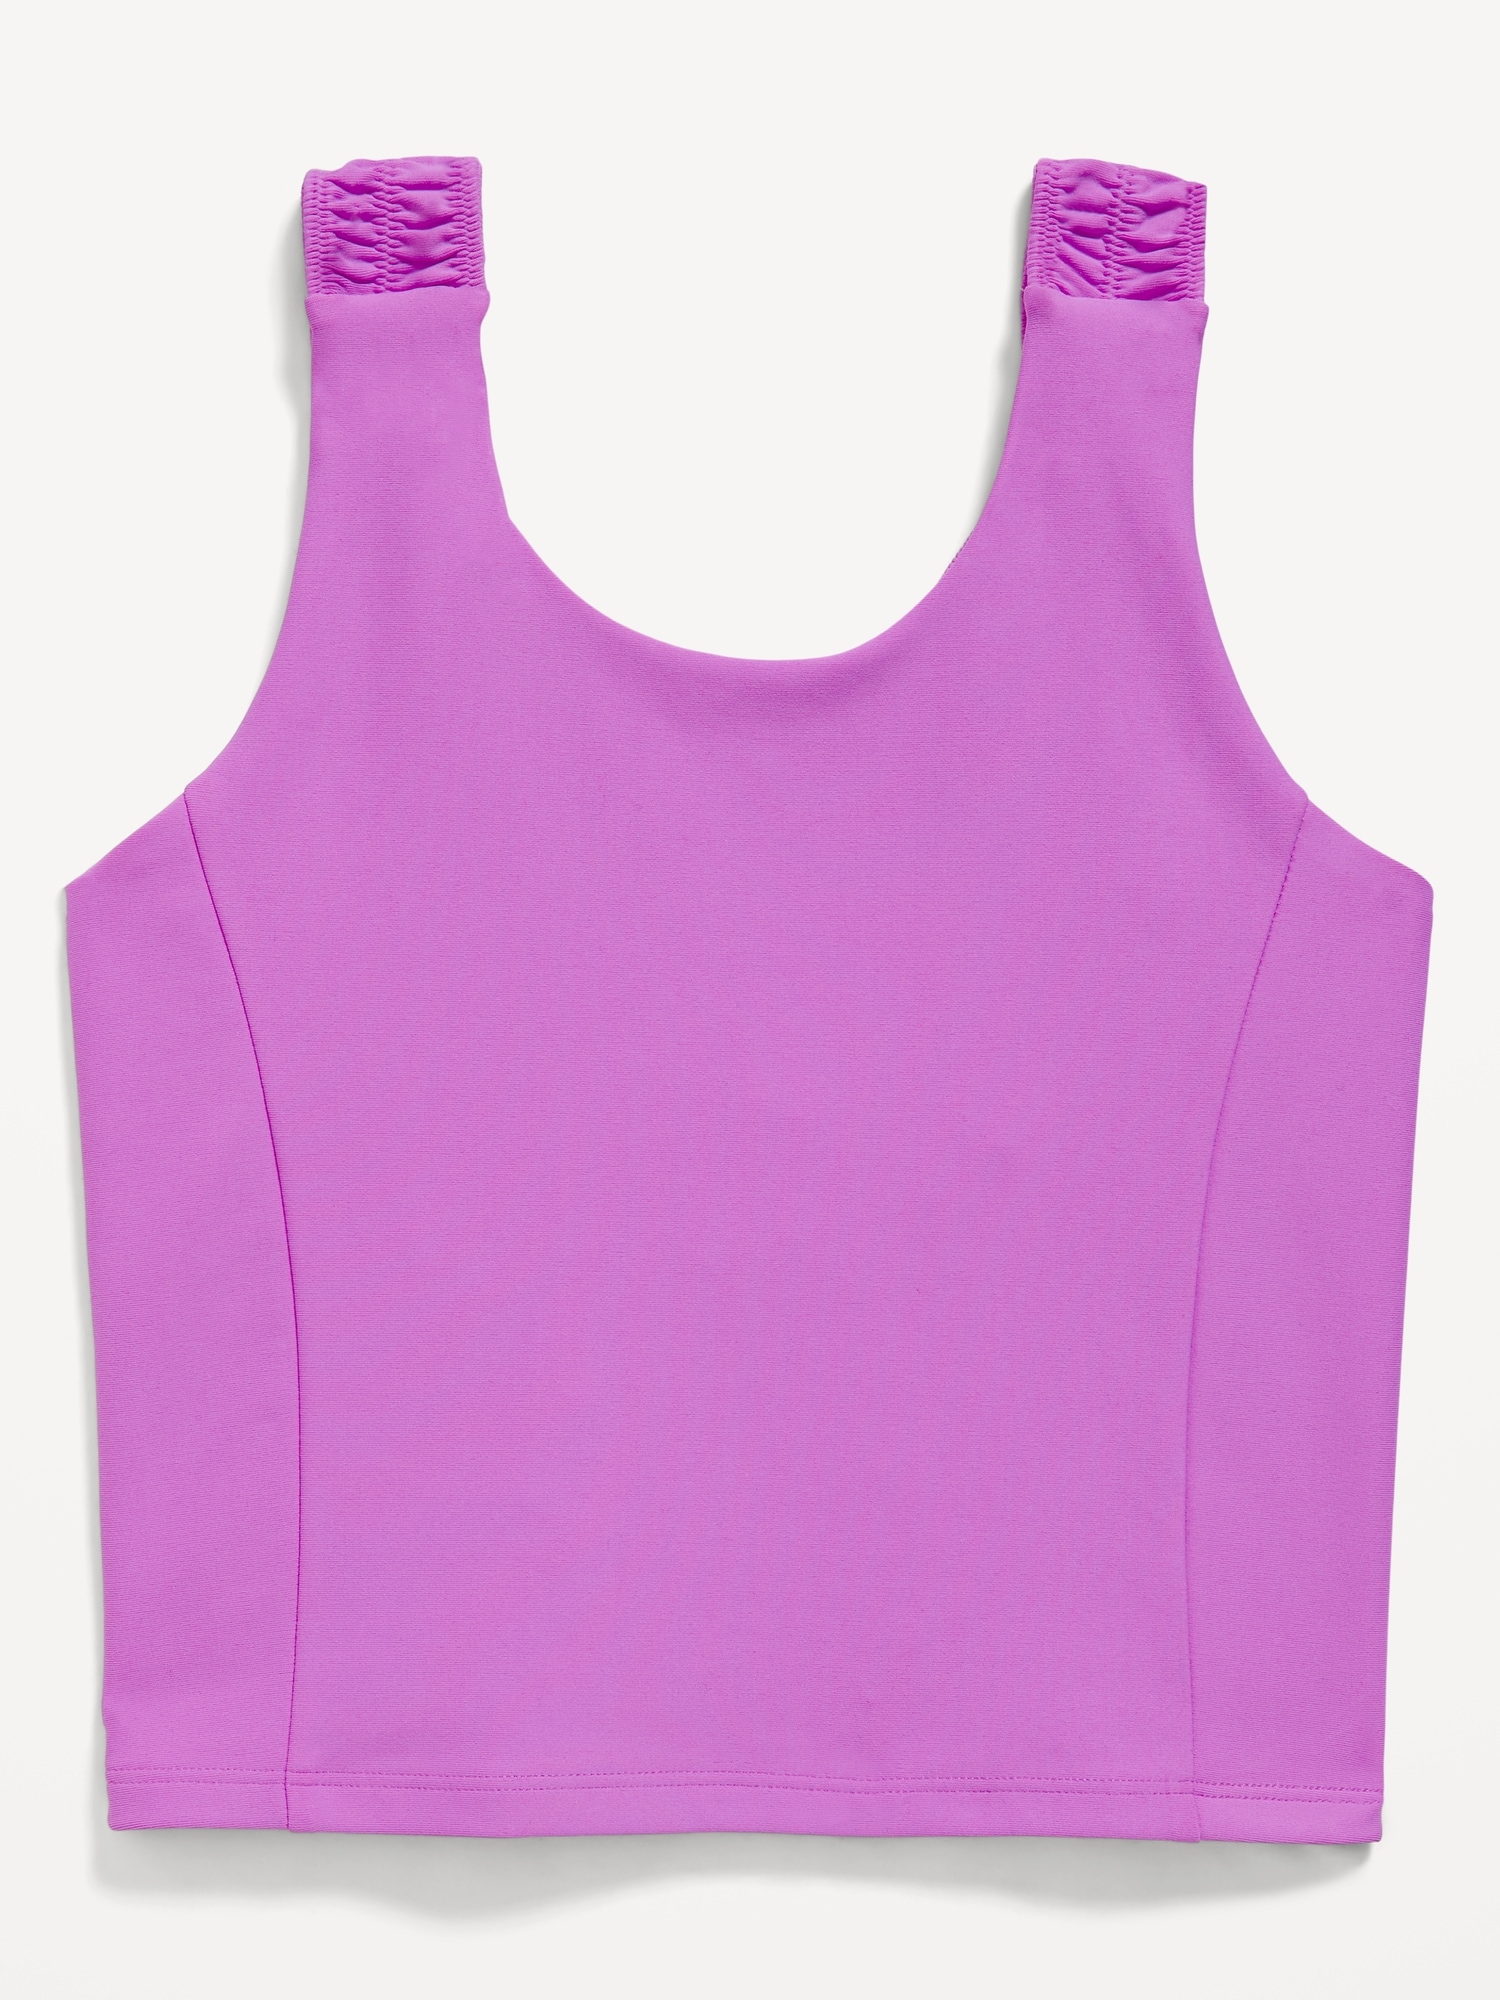 Old Navy Purple Ruched Sport Bra - size small